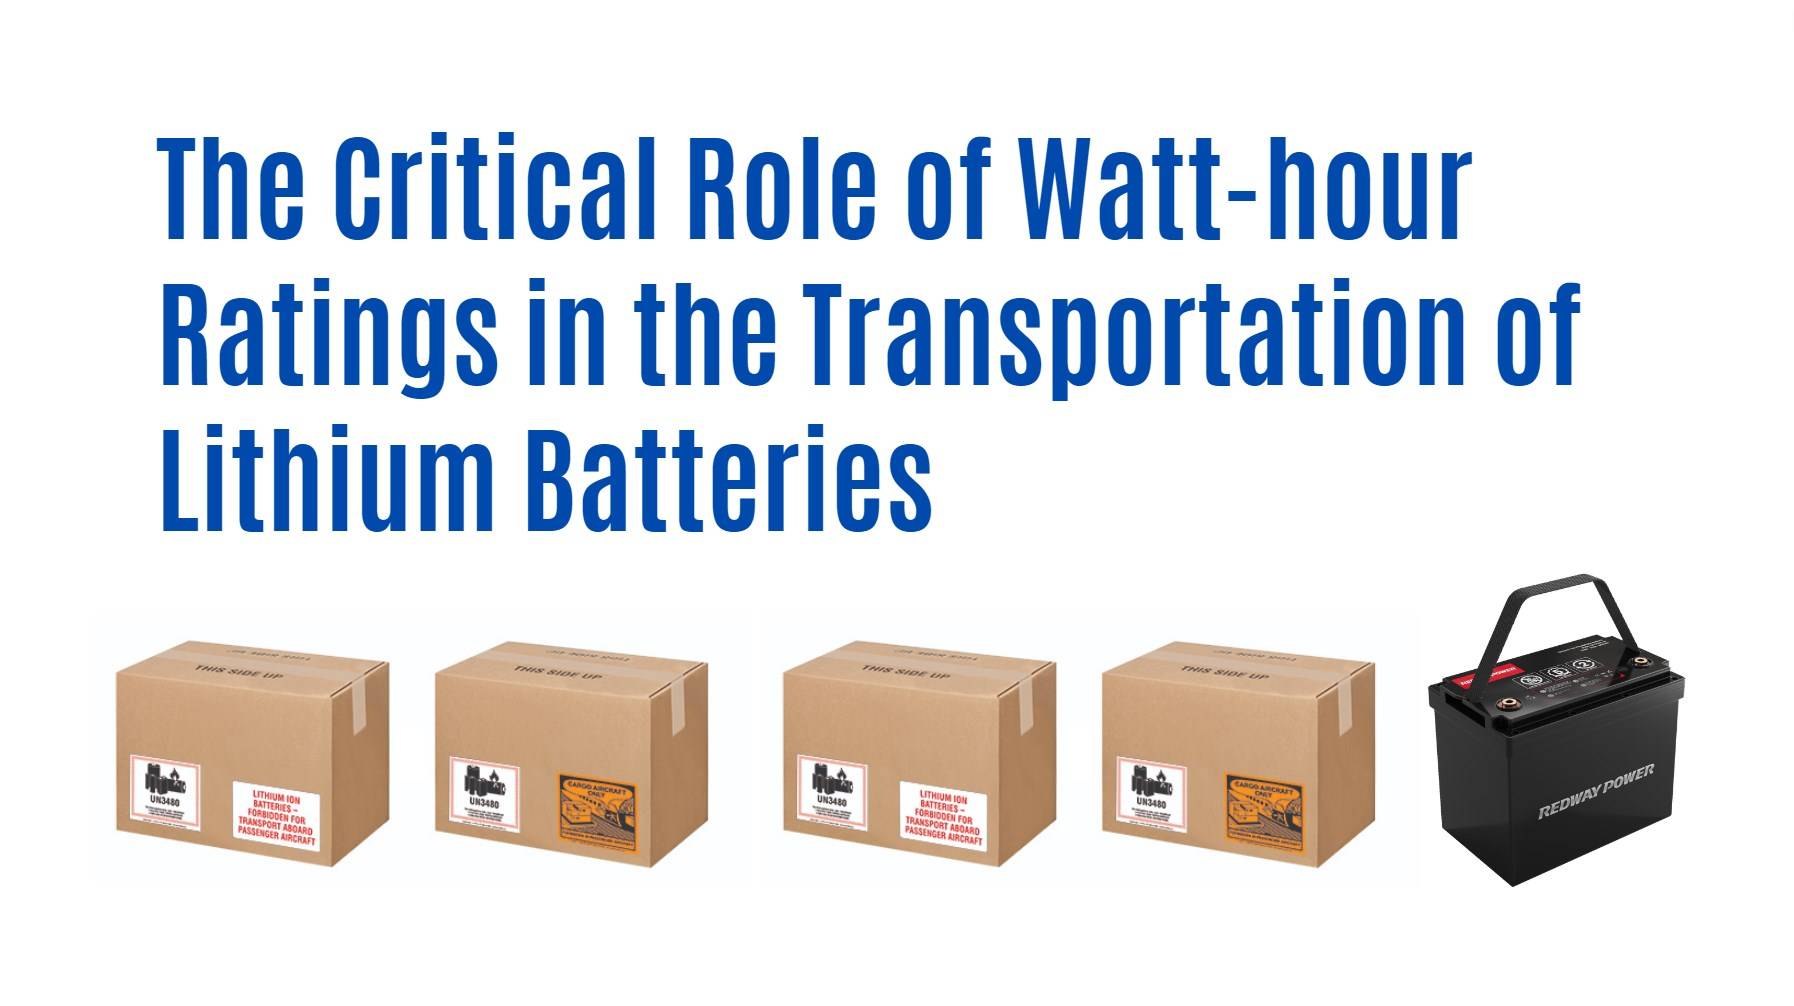 The Critical Role of Watt-hour Ratings in the Transportation of Lithium Batteries